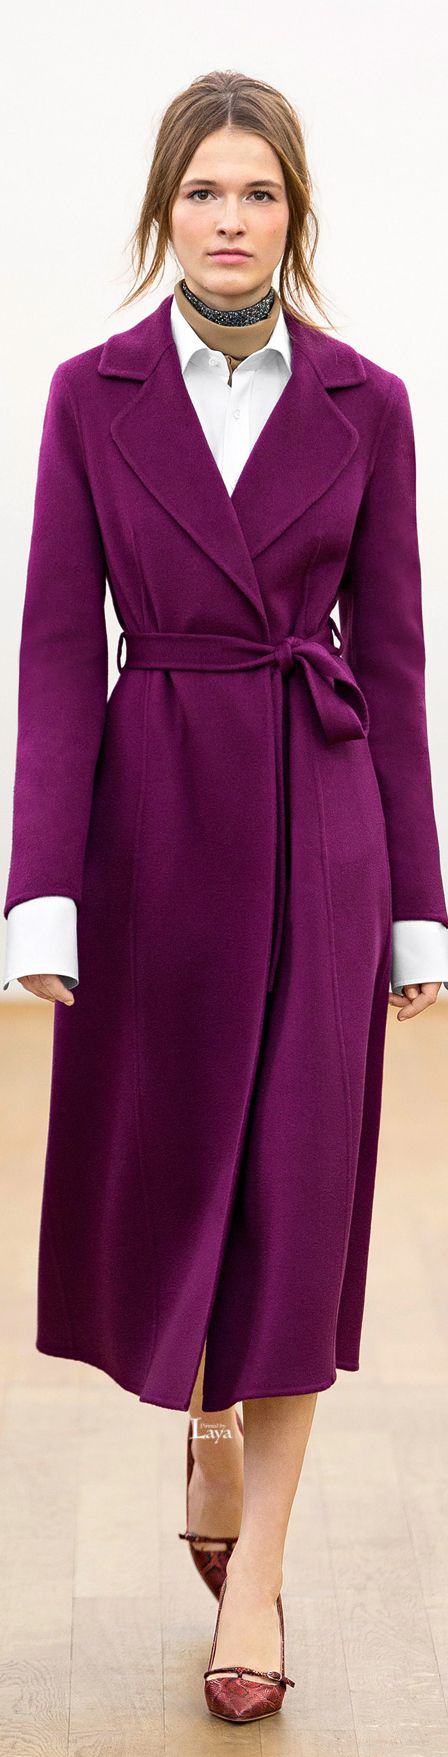 outfit with plum coat